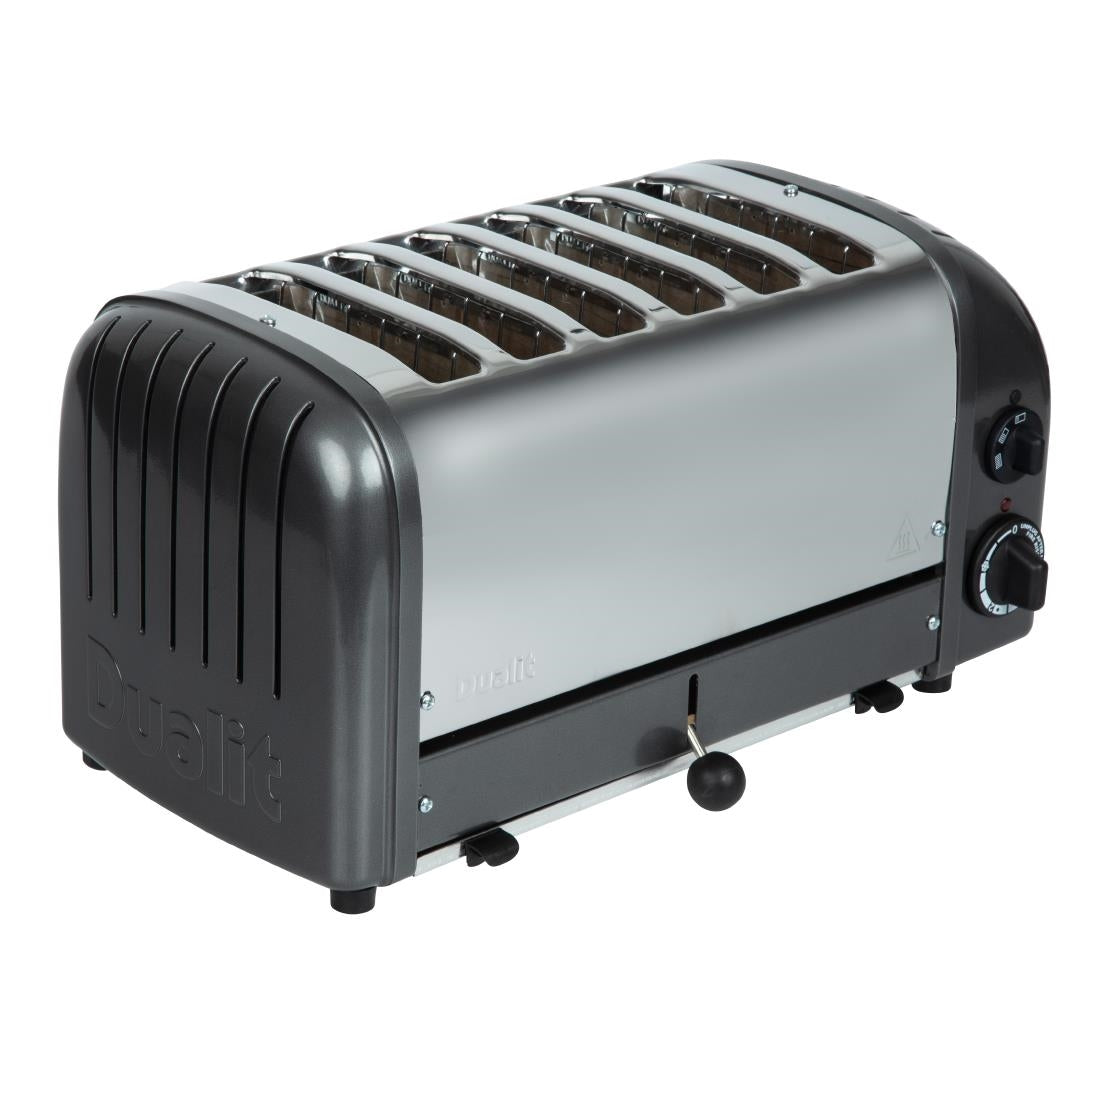 Dualit 6 Slice Vario Toaster Charcoal 60156 JD Catering Equipment Solutions Ltd